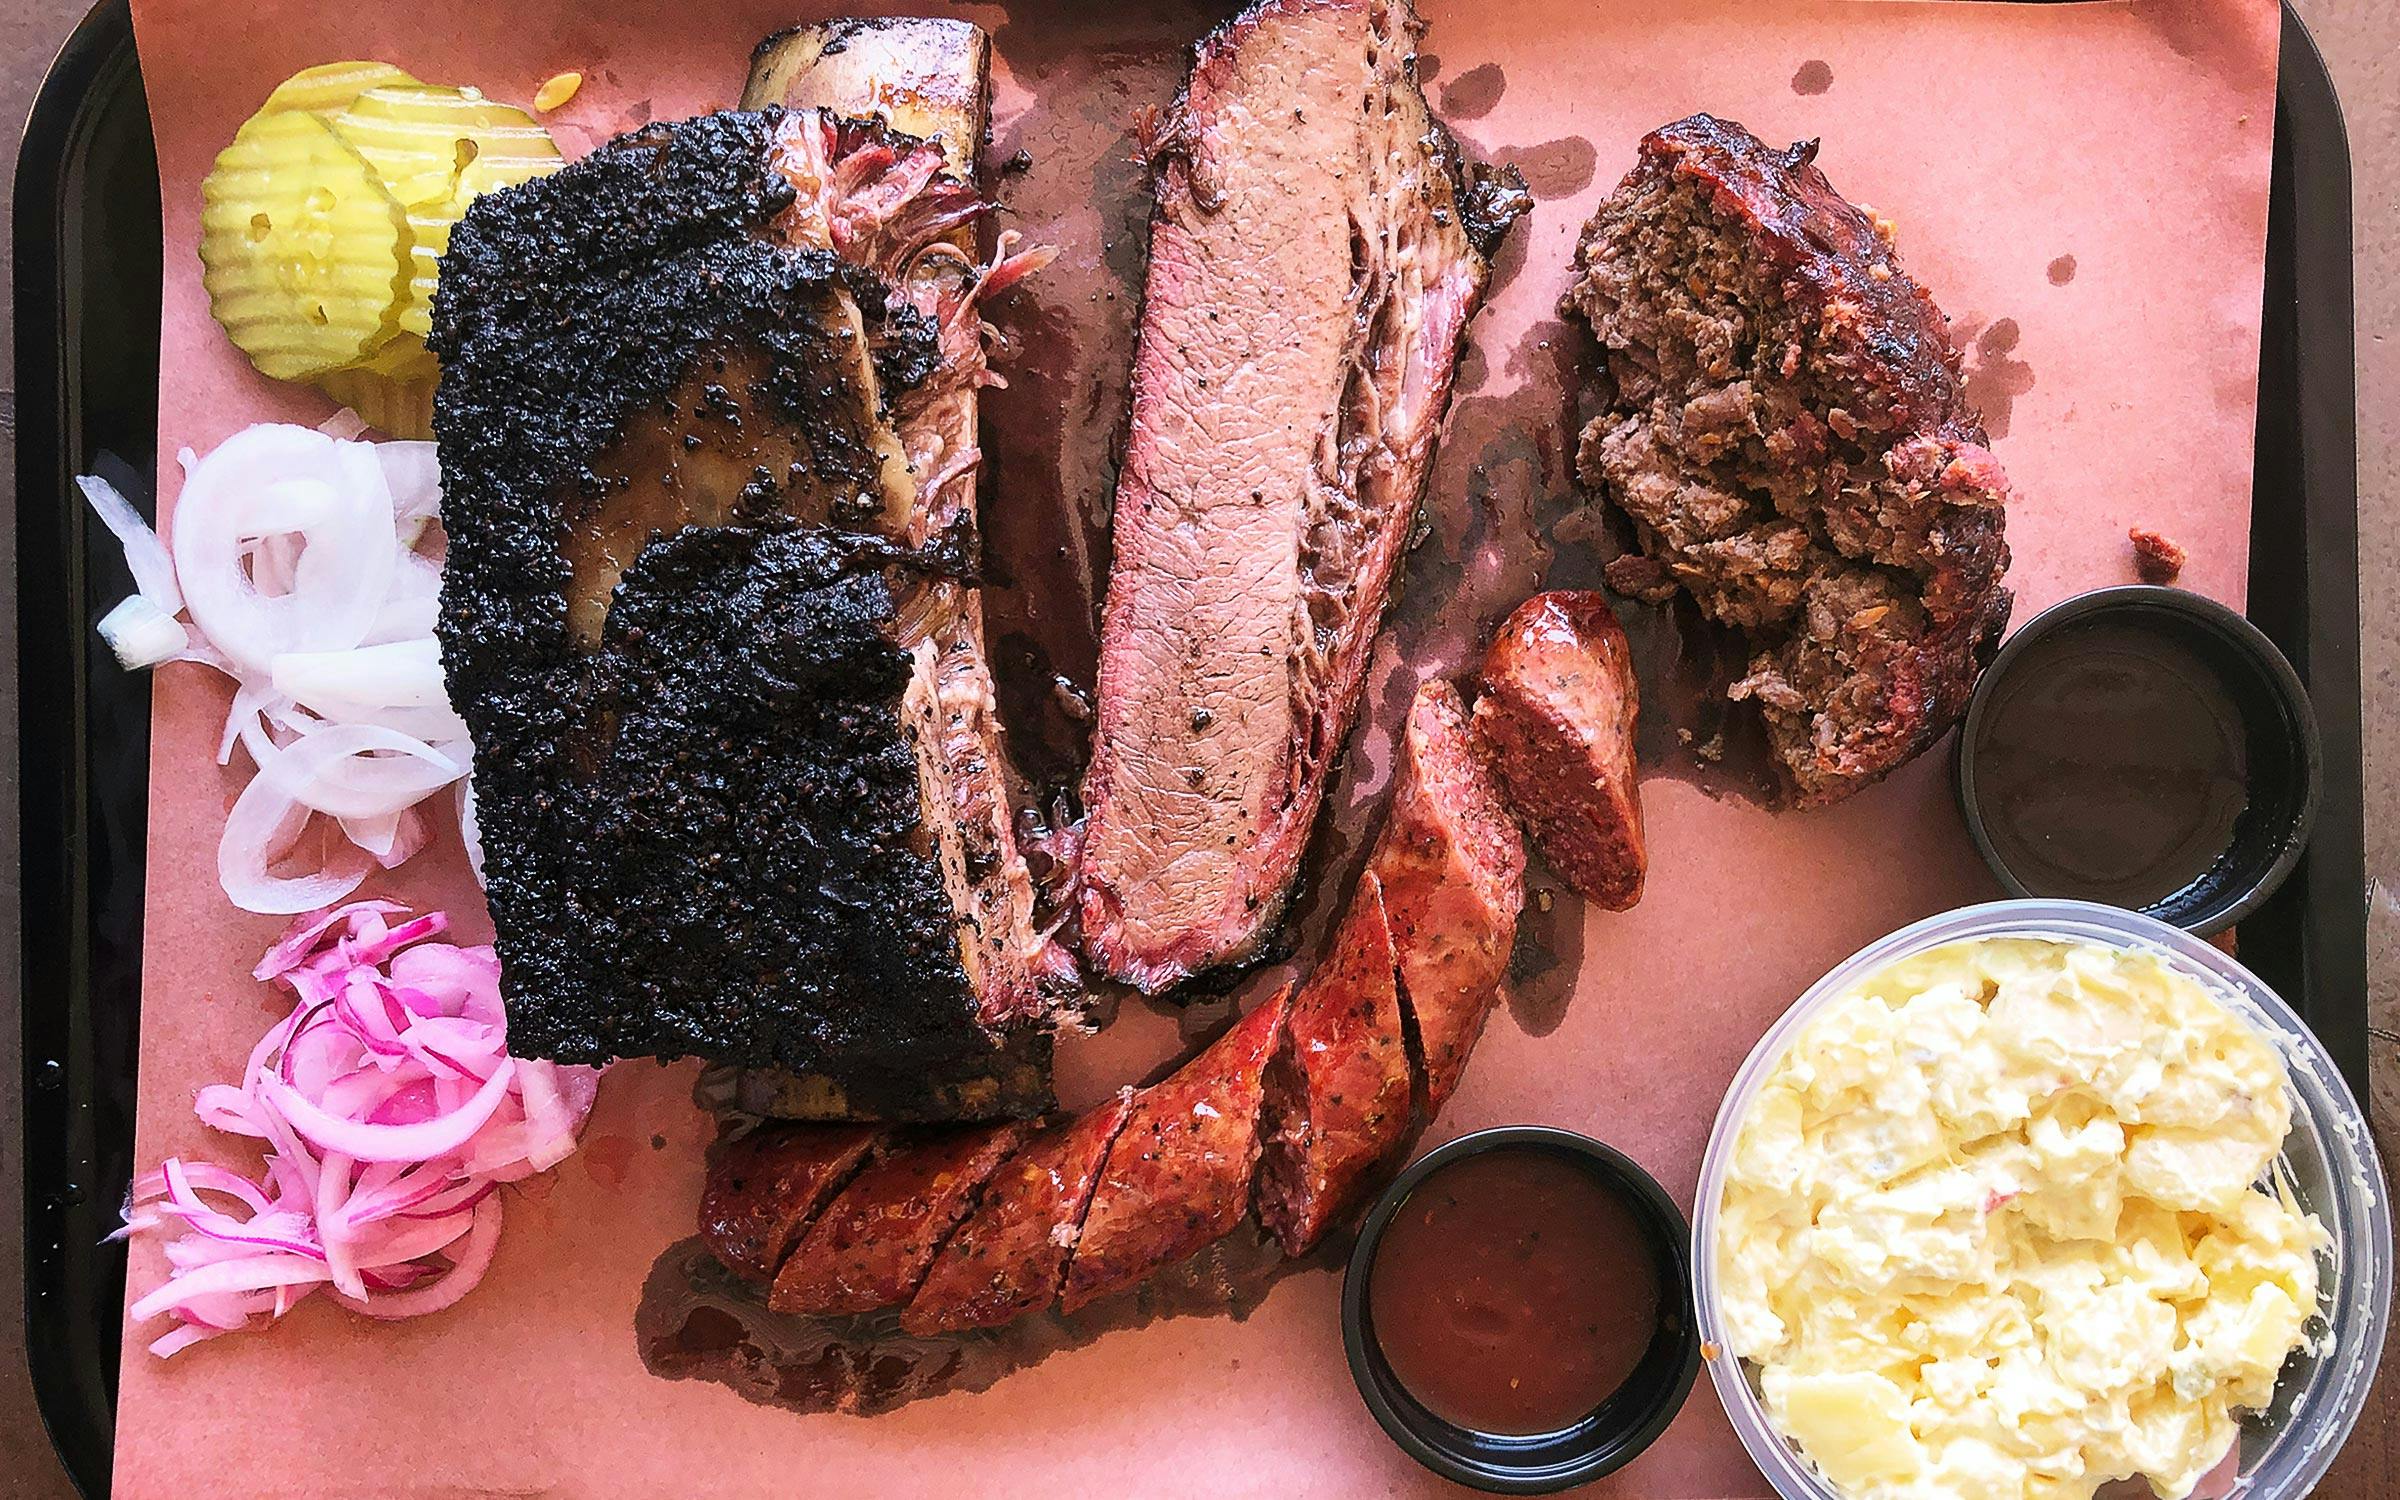 News Roundup: A Fort Worth Restaurant's New Online “Meat Sells Brisket to Smoke at Home – Monthly